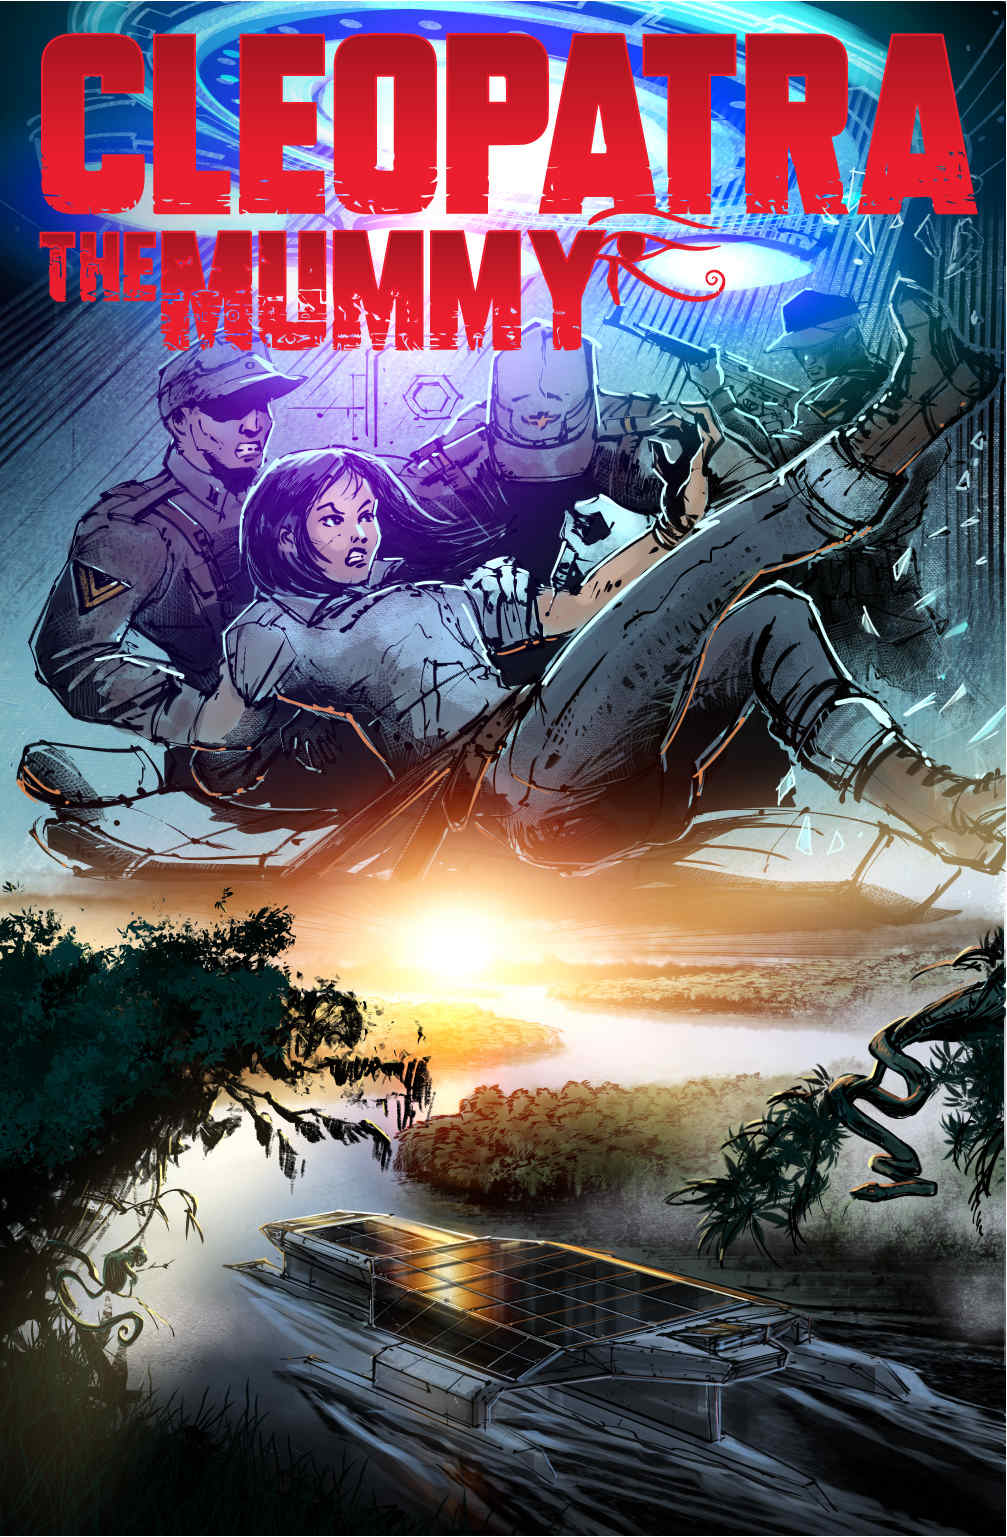 Cleopatra The Mummy is a John Storm adventure where the pharaoh queen of Egypt is digitally reincarnated